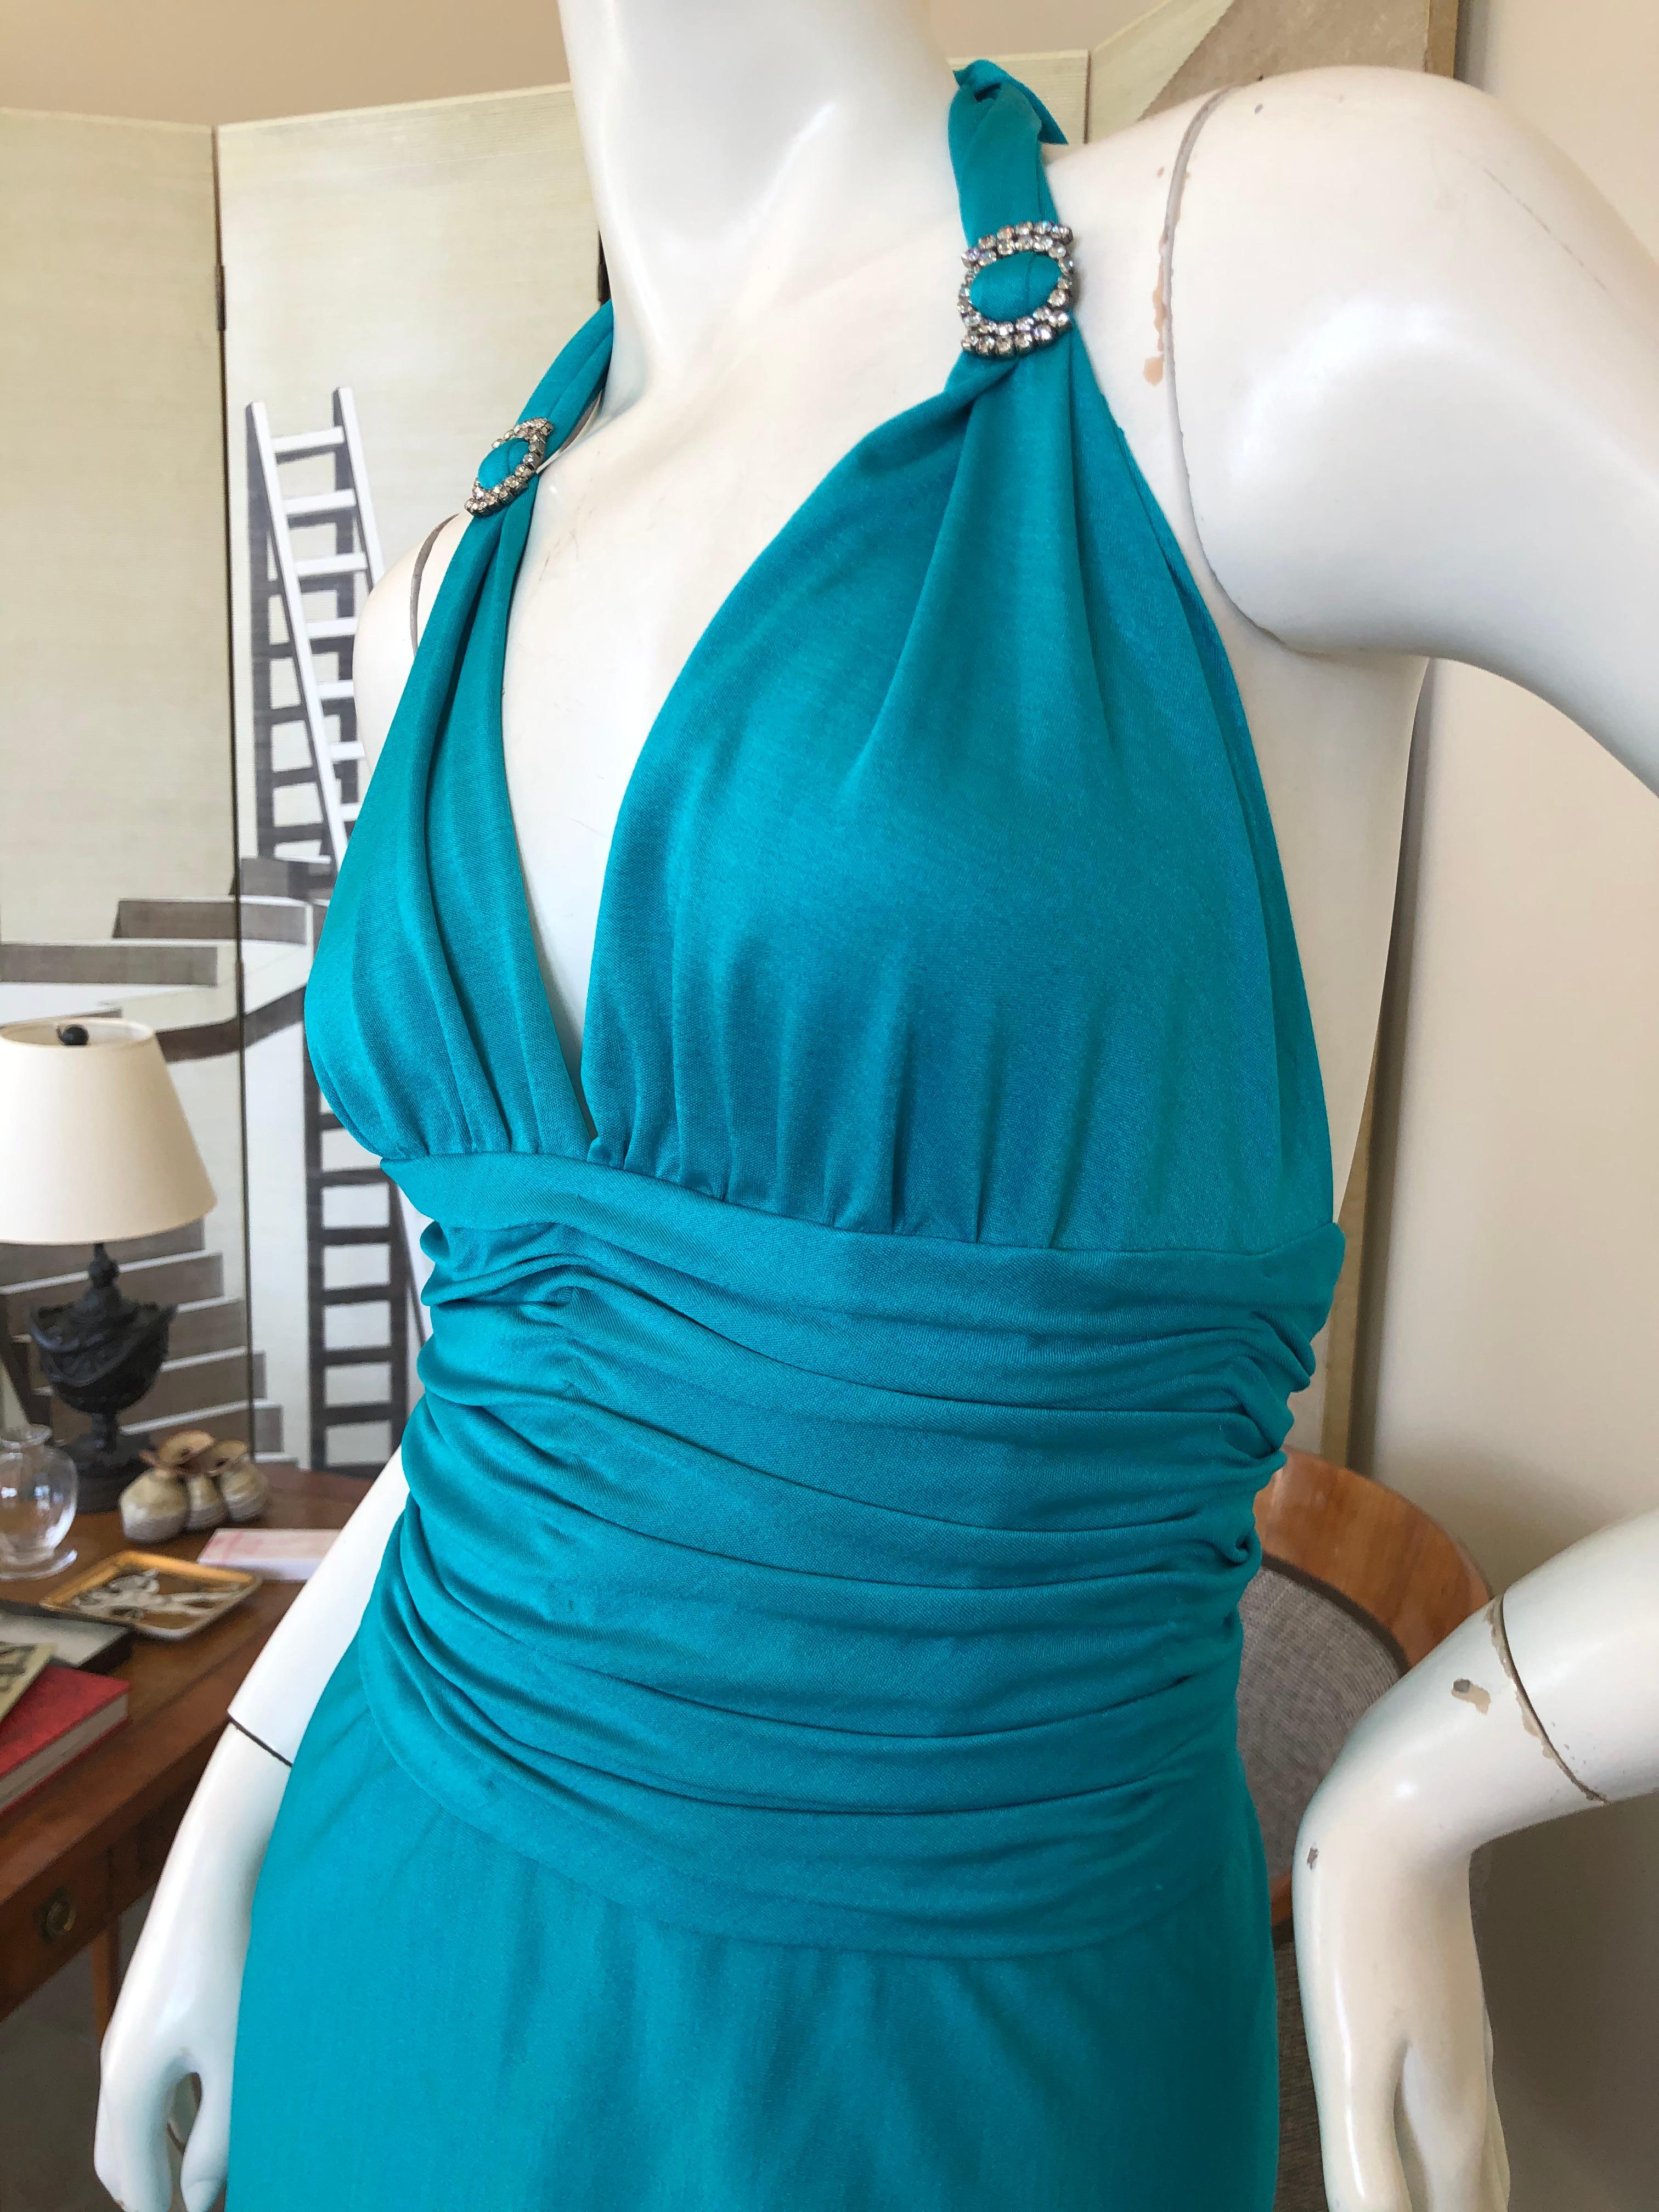 Loris Azzaro Couture 70's Low Cut Blue Cocktail Dress with Crystal Accents In Excellent Condition For Sale In Cloverdale, CA